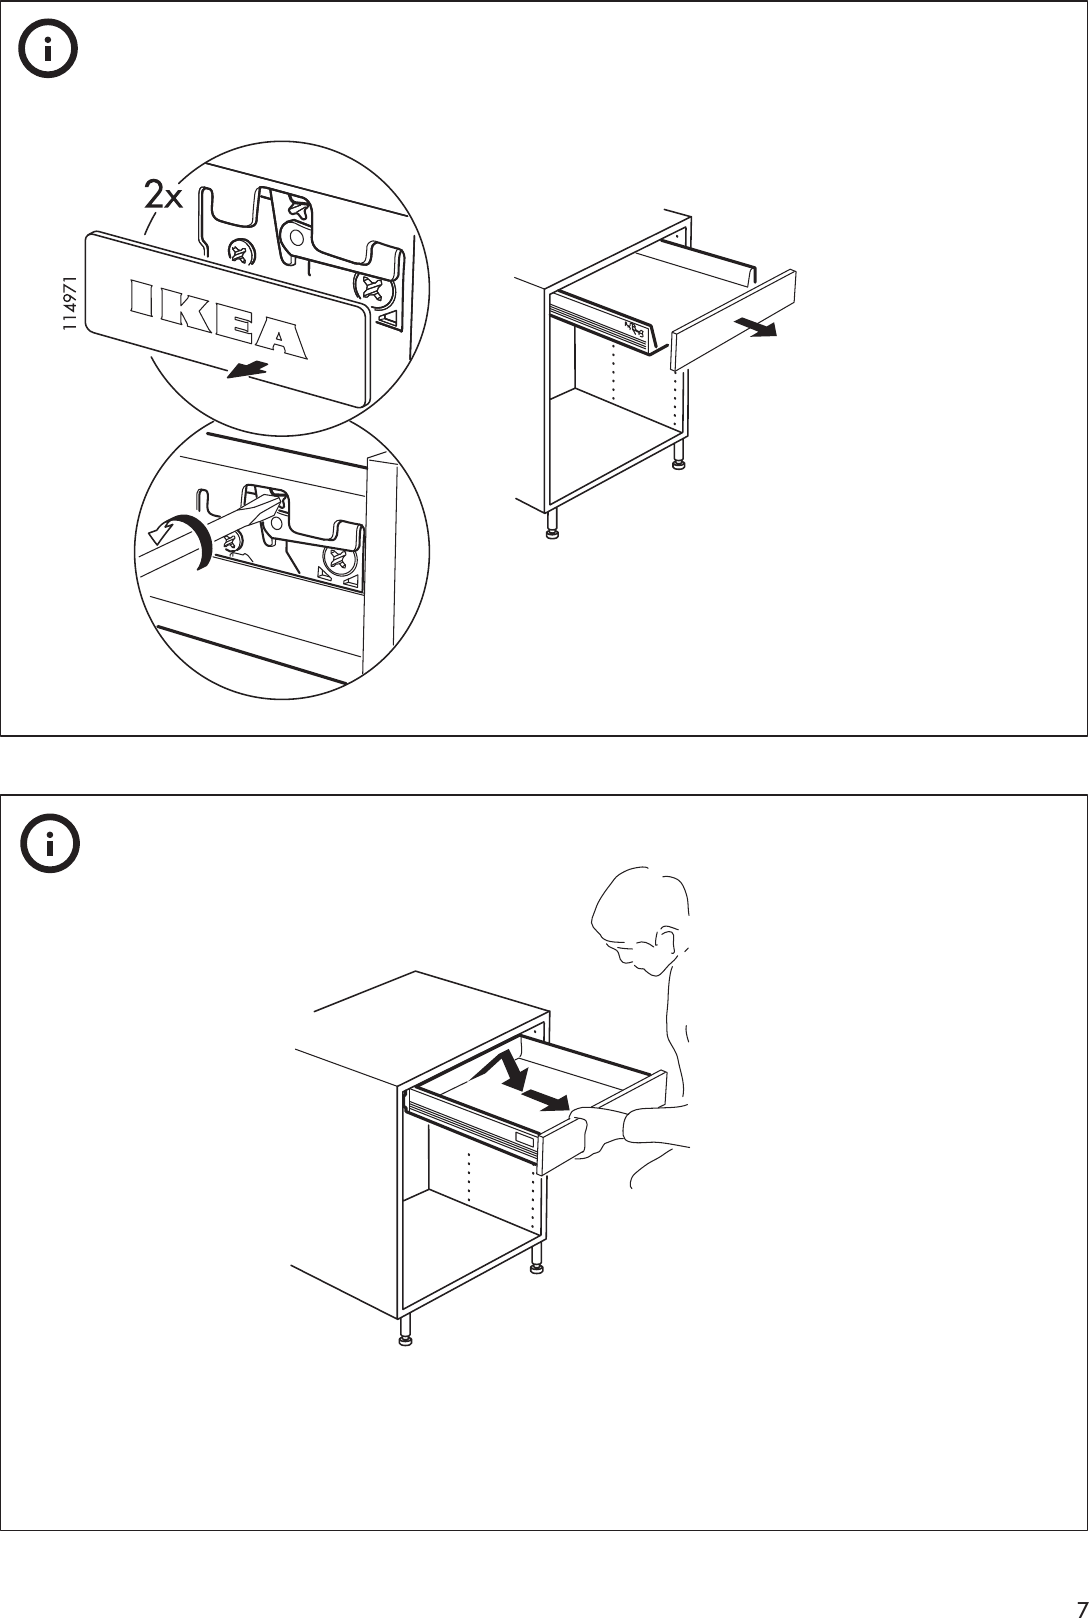 Page 7 of 8 - Ikea Ikea-Rationell-Full-Extending-Drawer-24-Assembly-Instruction